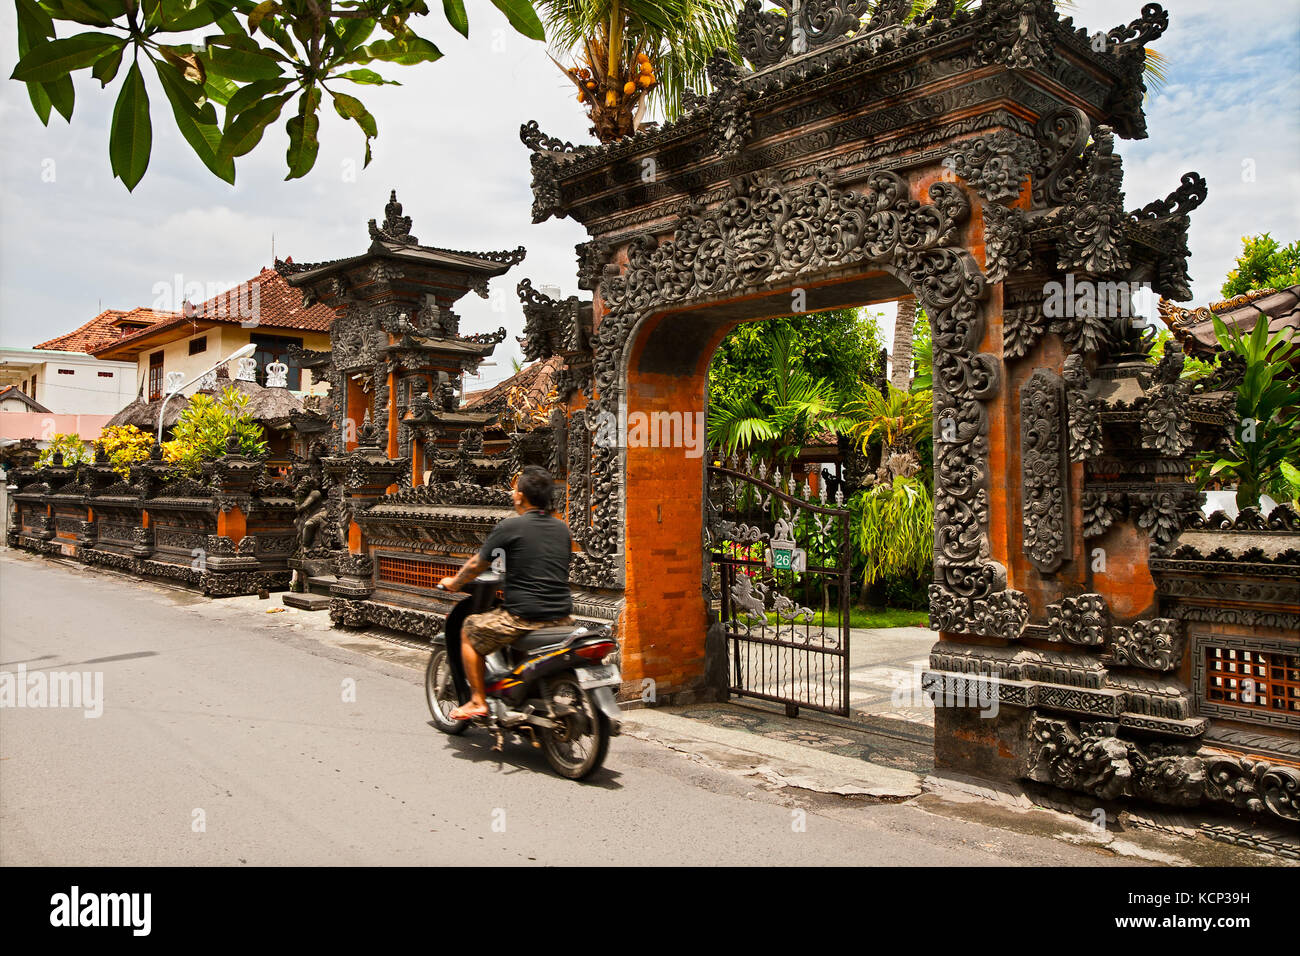 Traditional design of Balinese dwelling house and home temple Stock Photo